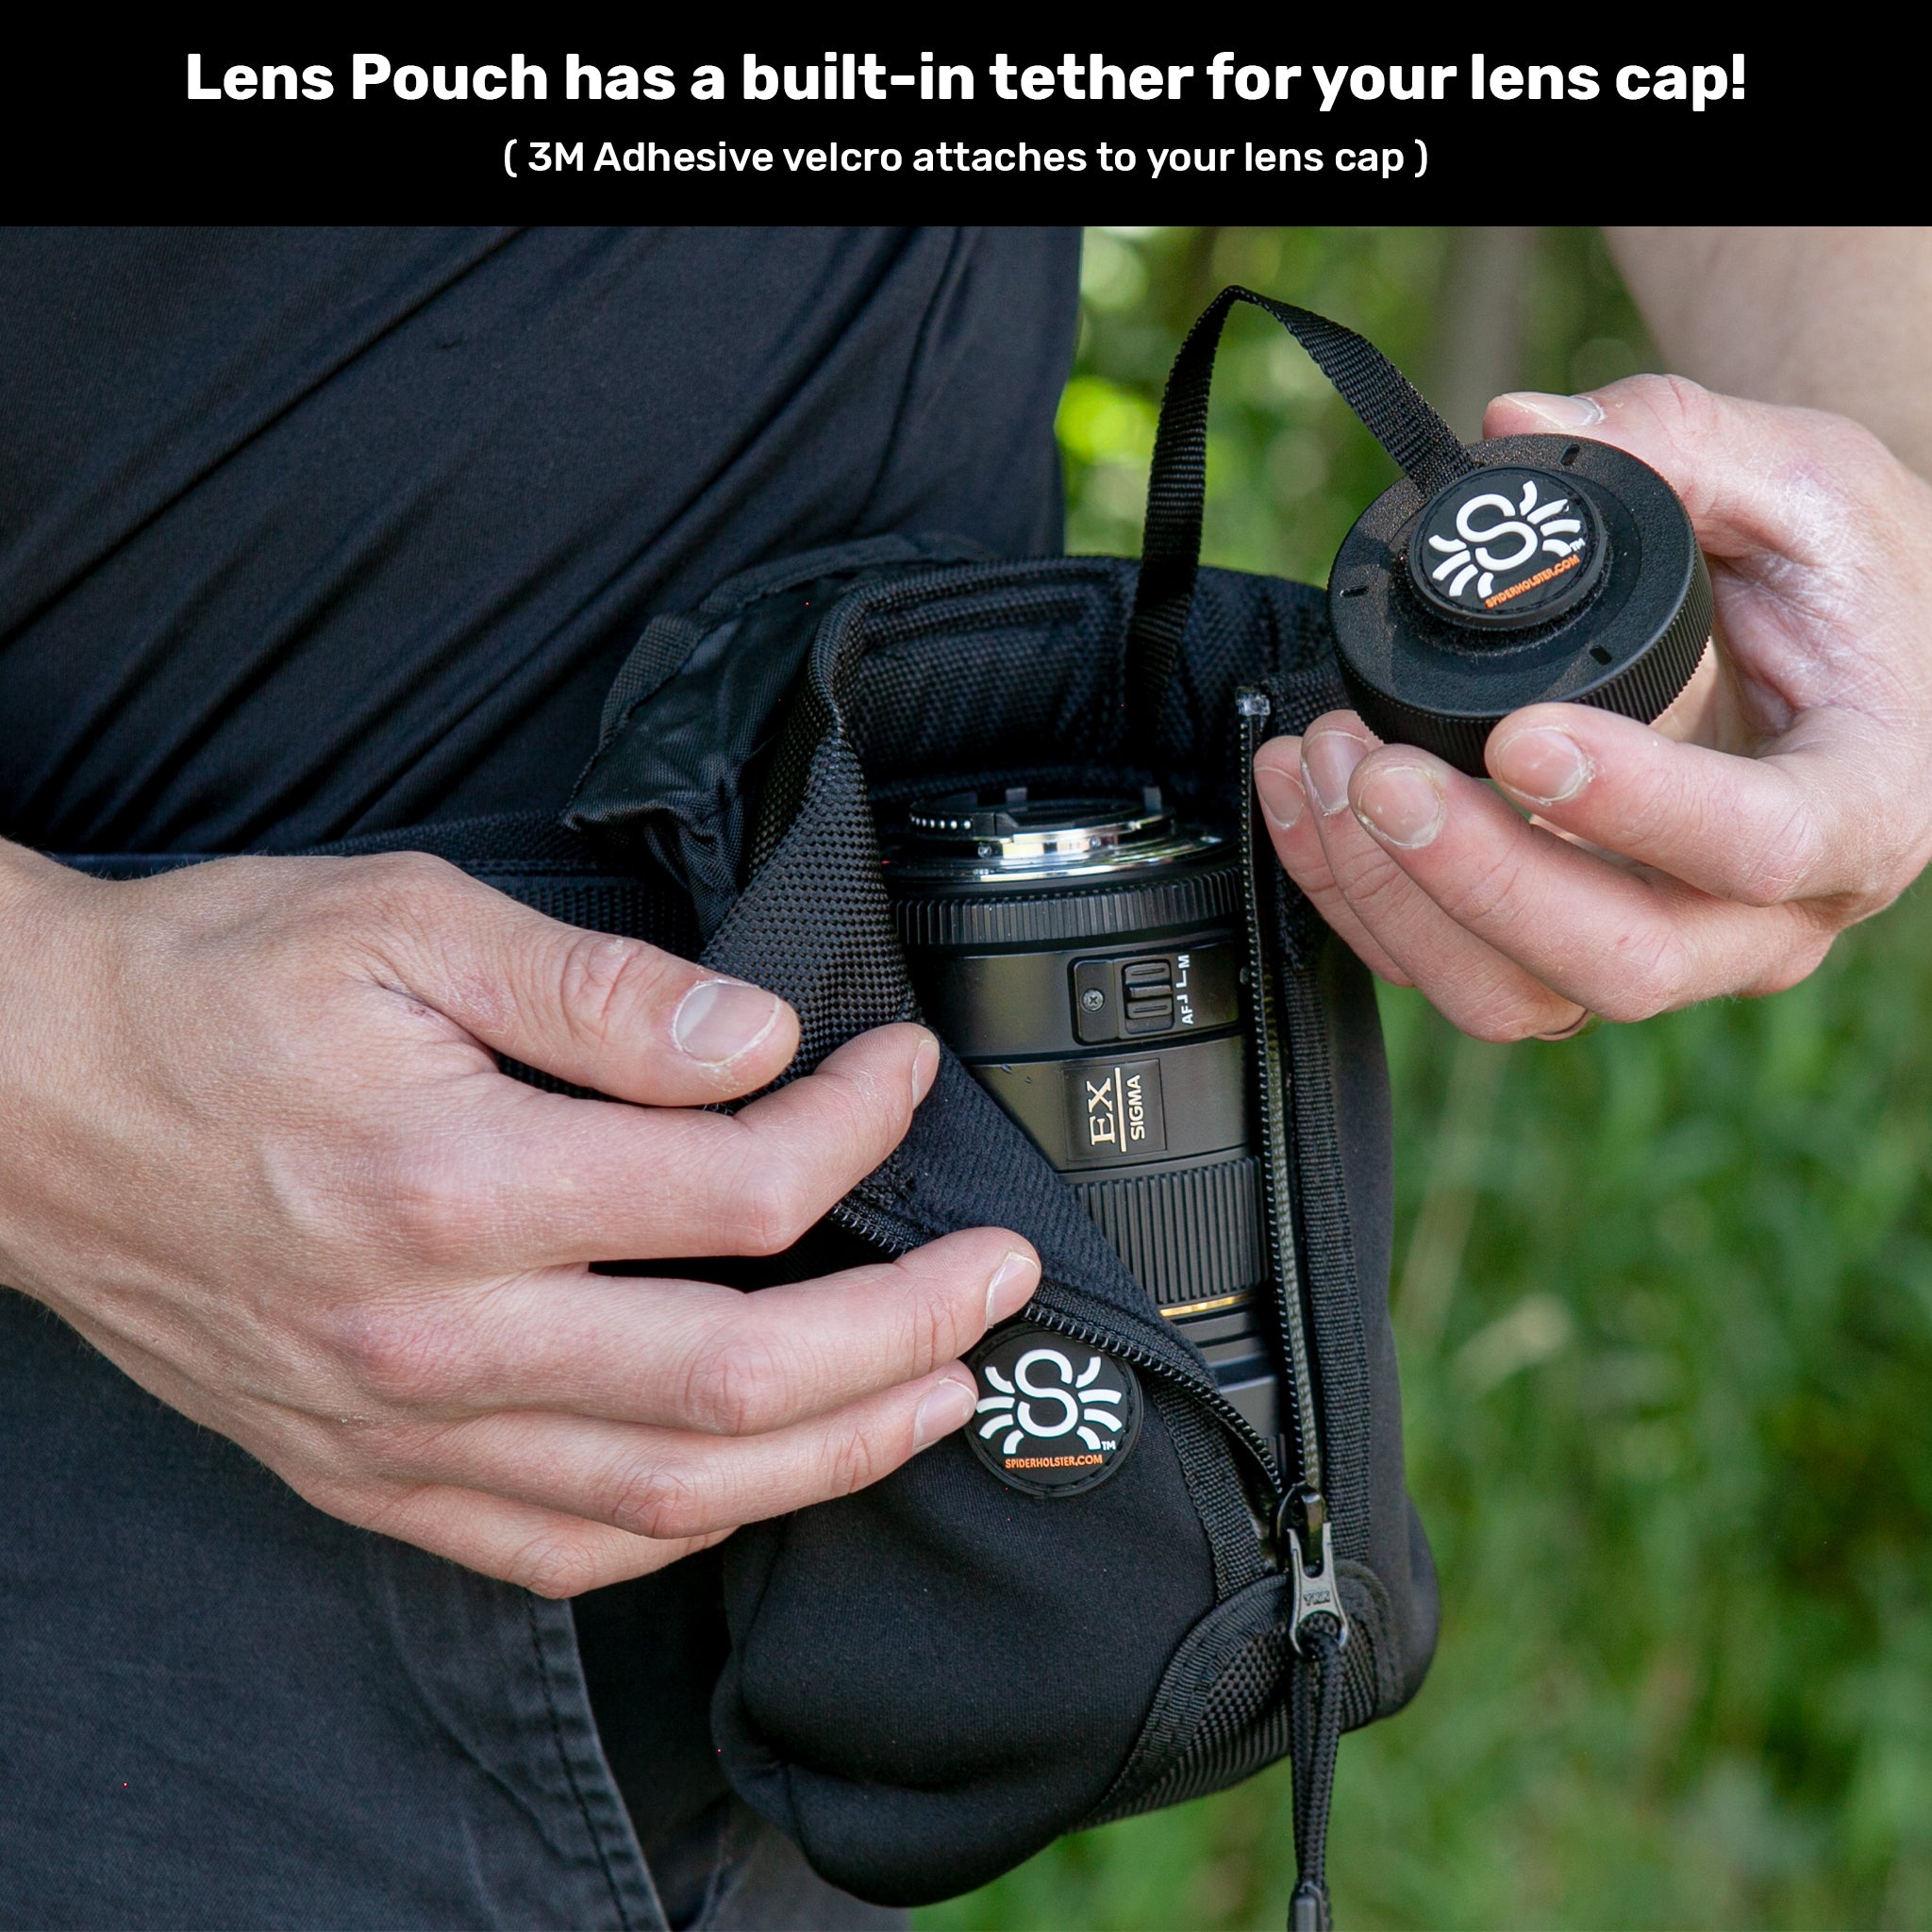 Spider Lens Pouch